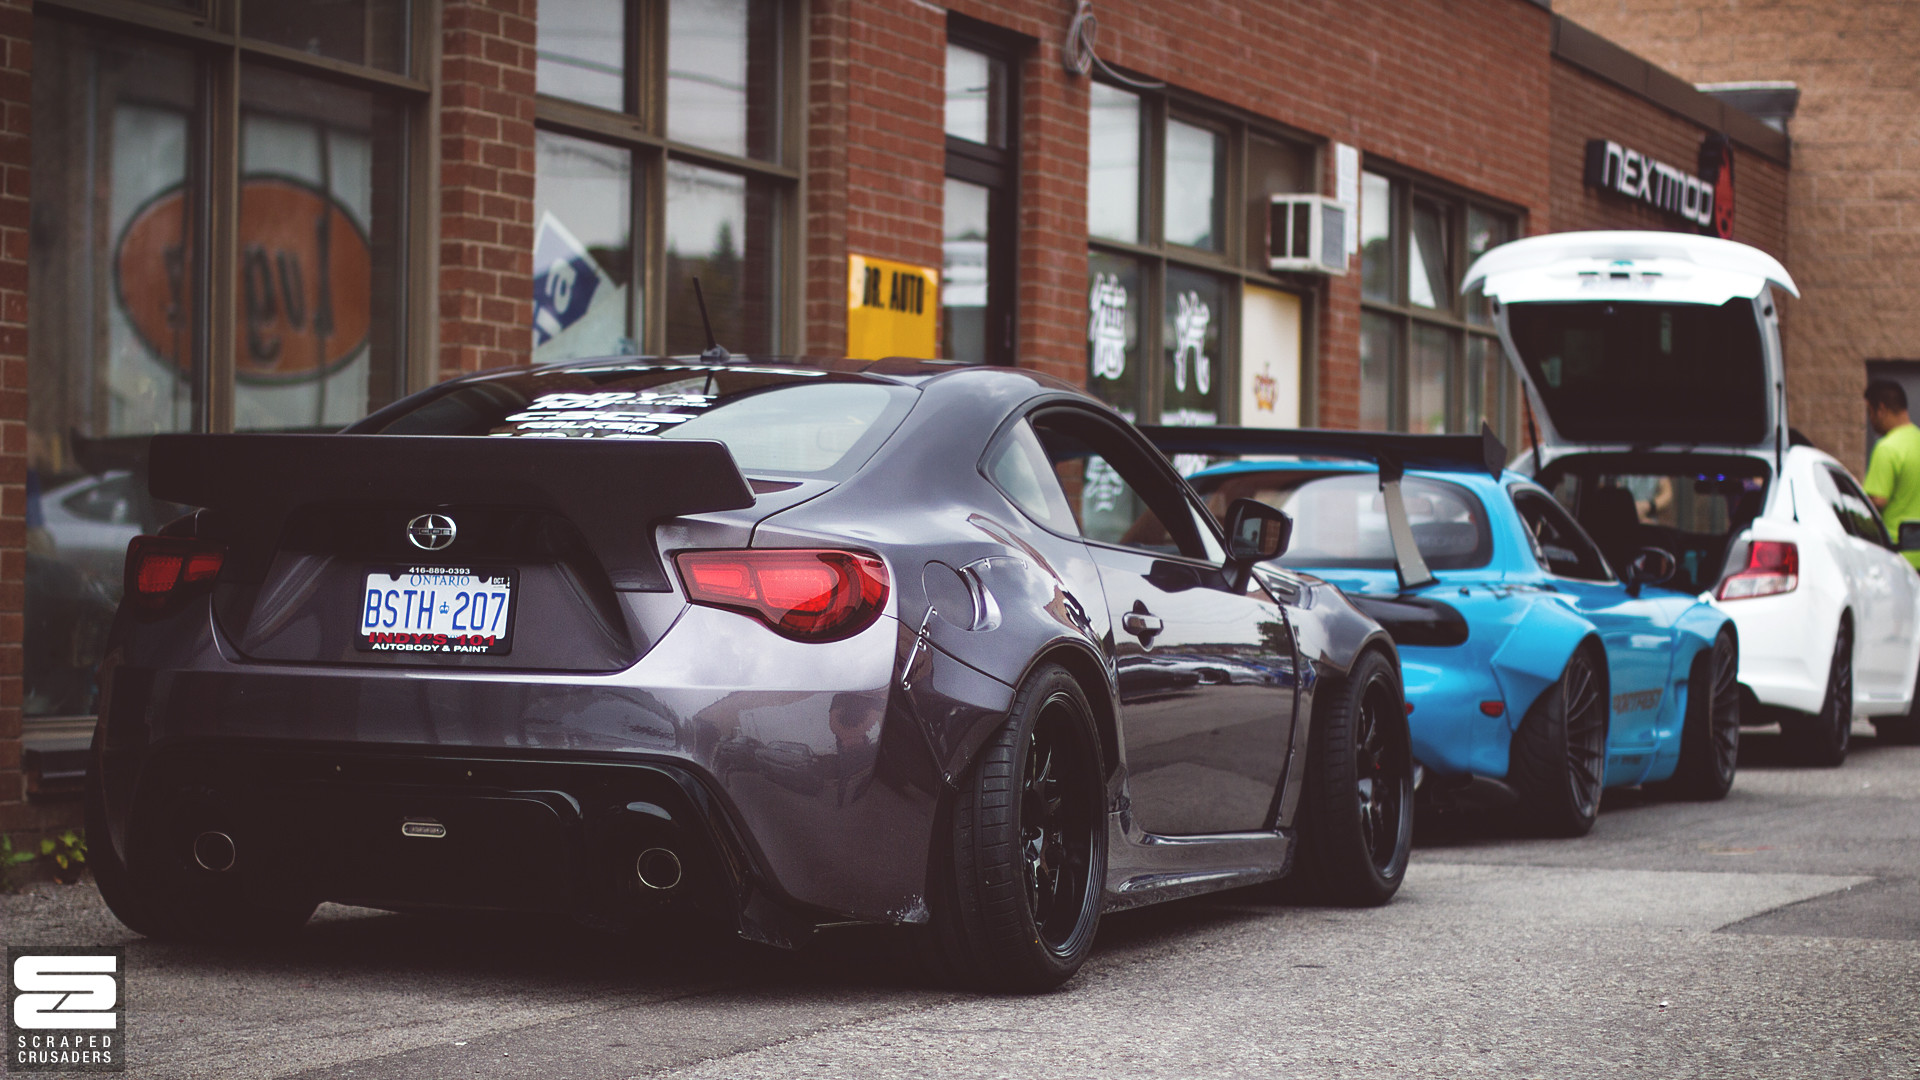 1920x1080 Search Results for “brz rocket bunny wallpaper” – Adorable Wallpapers